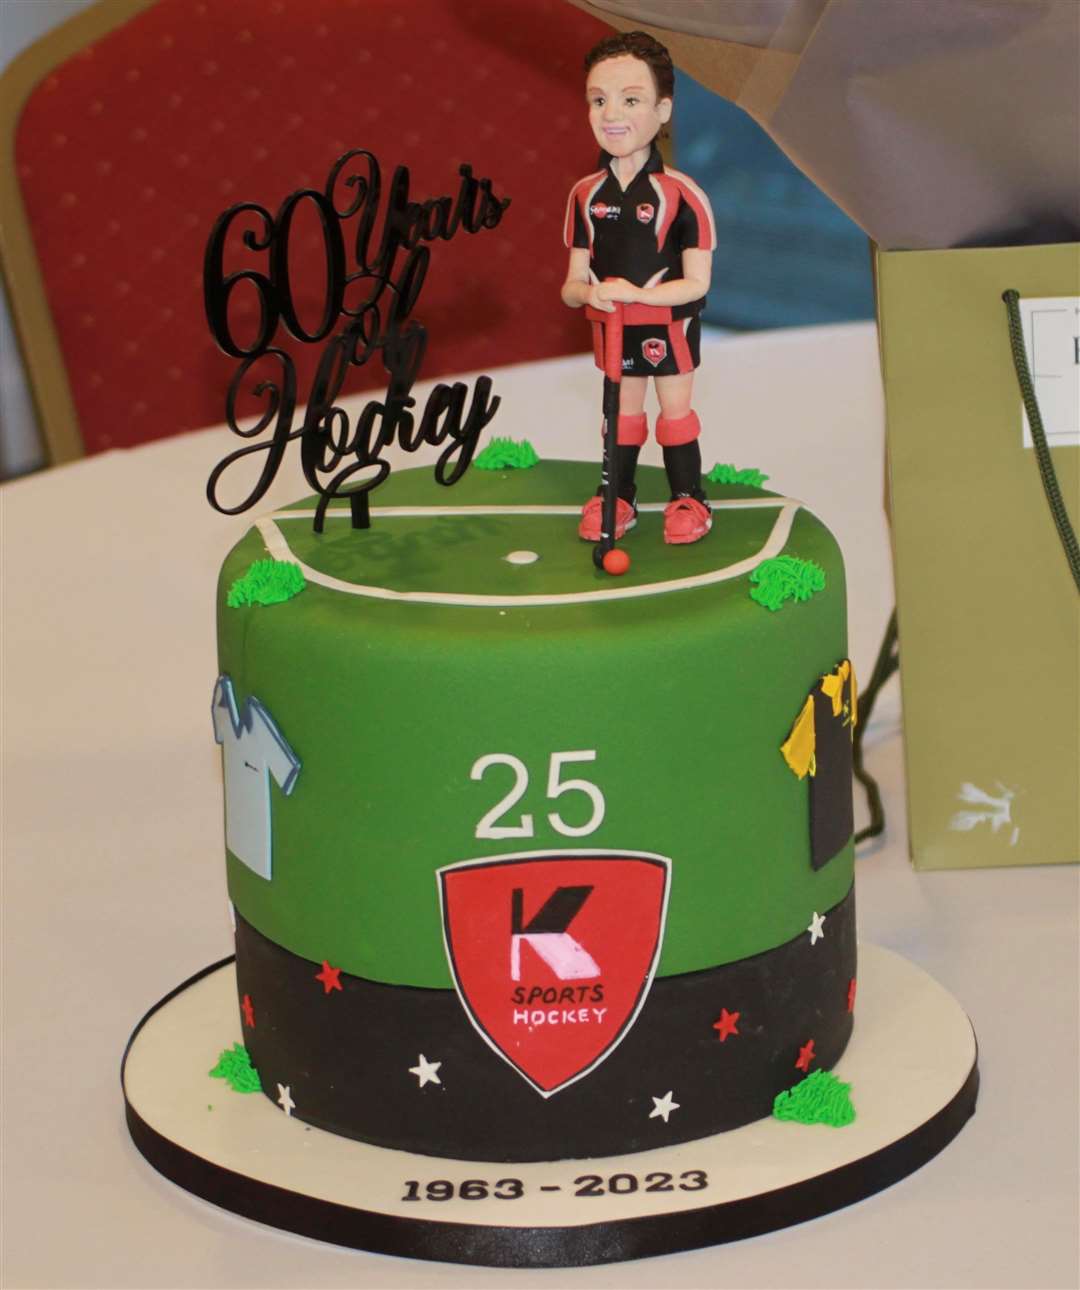 A celebratory cake marking Jenny Divall’s 60 years at K Sports Hockey Club. Picture: Ryan Wood